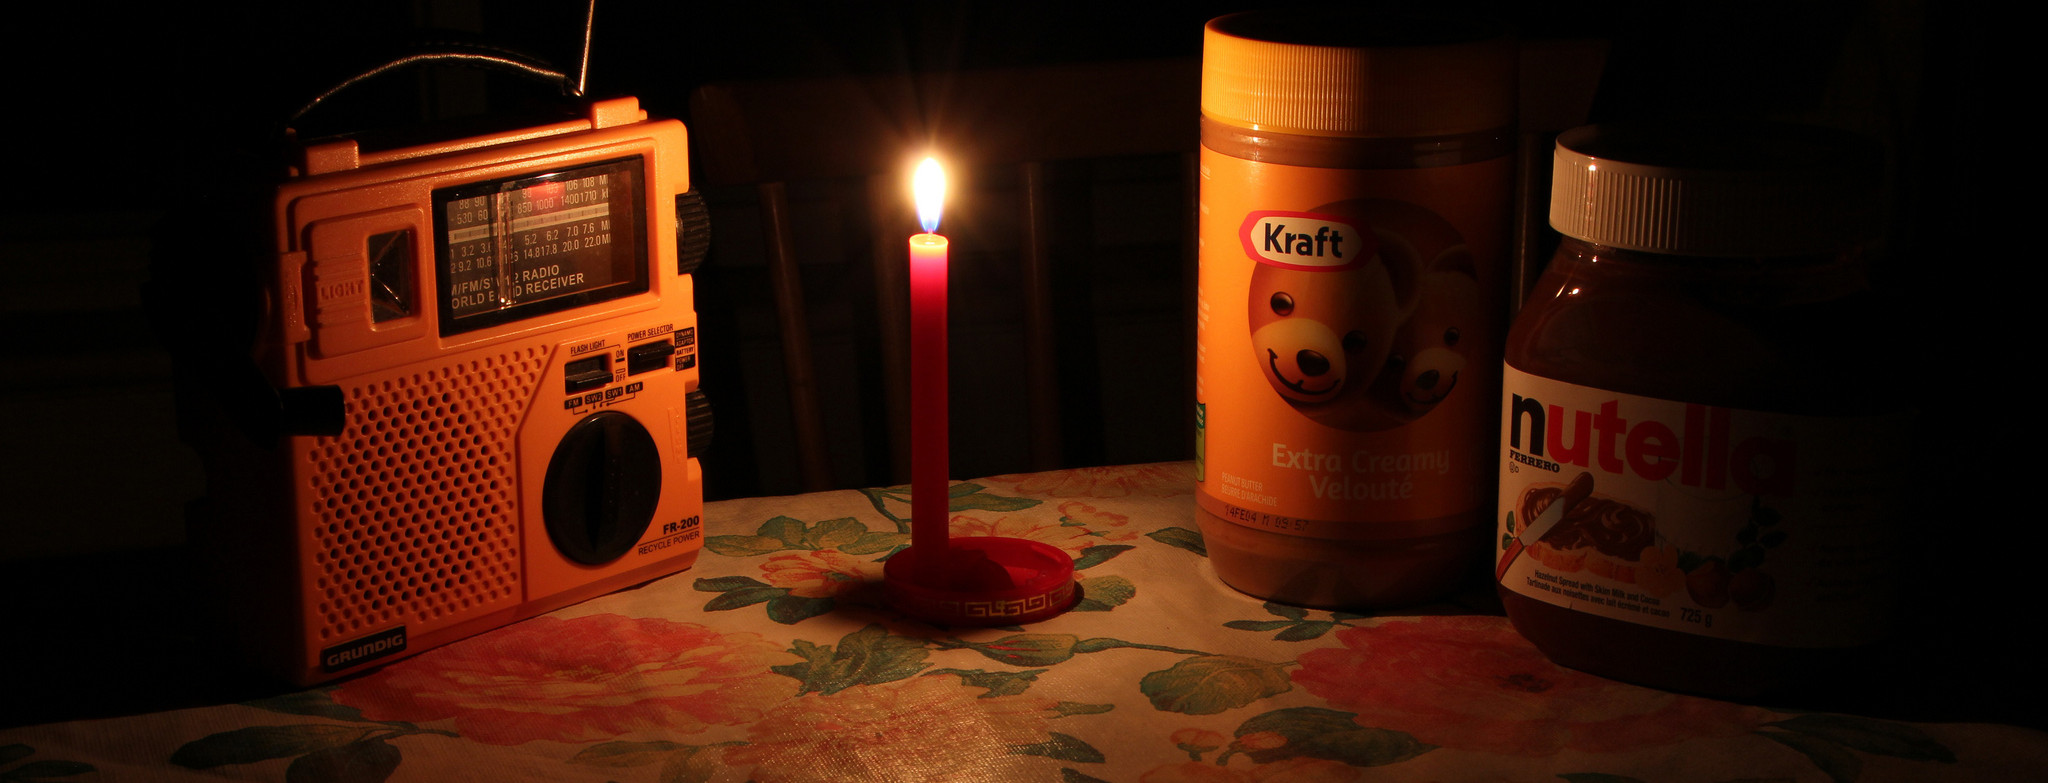 How to prepare for a power outage, according to a professional prepper